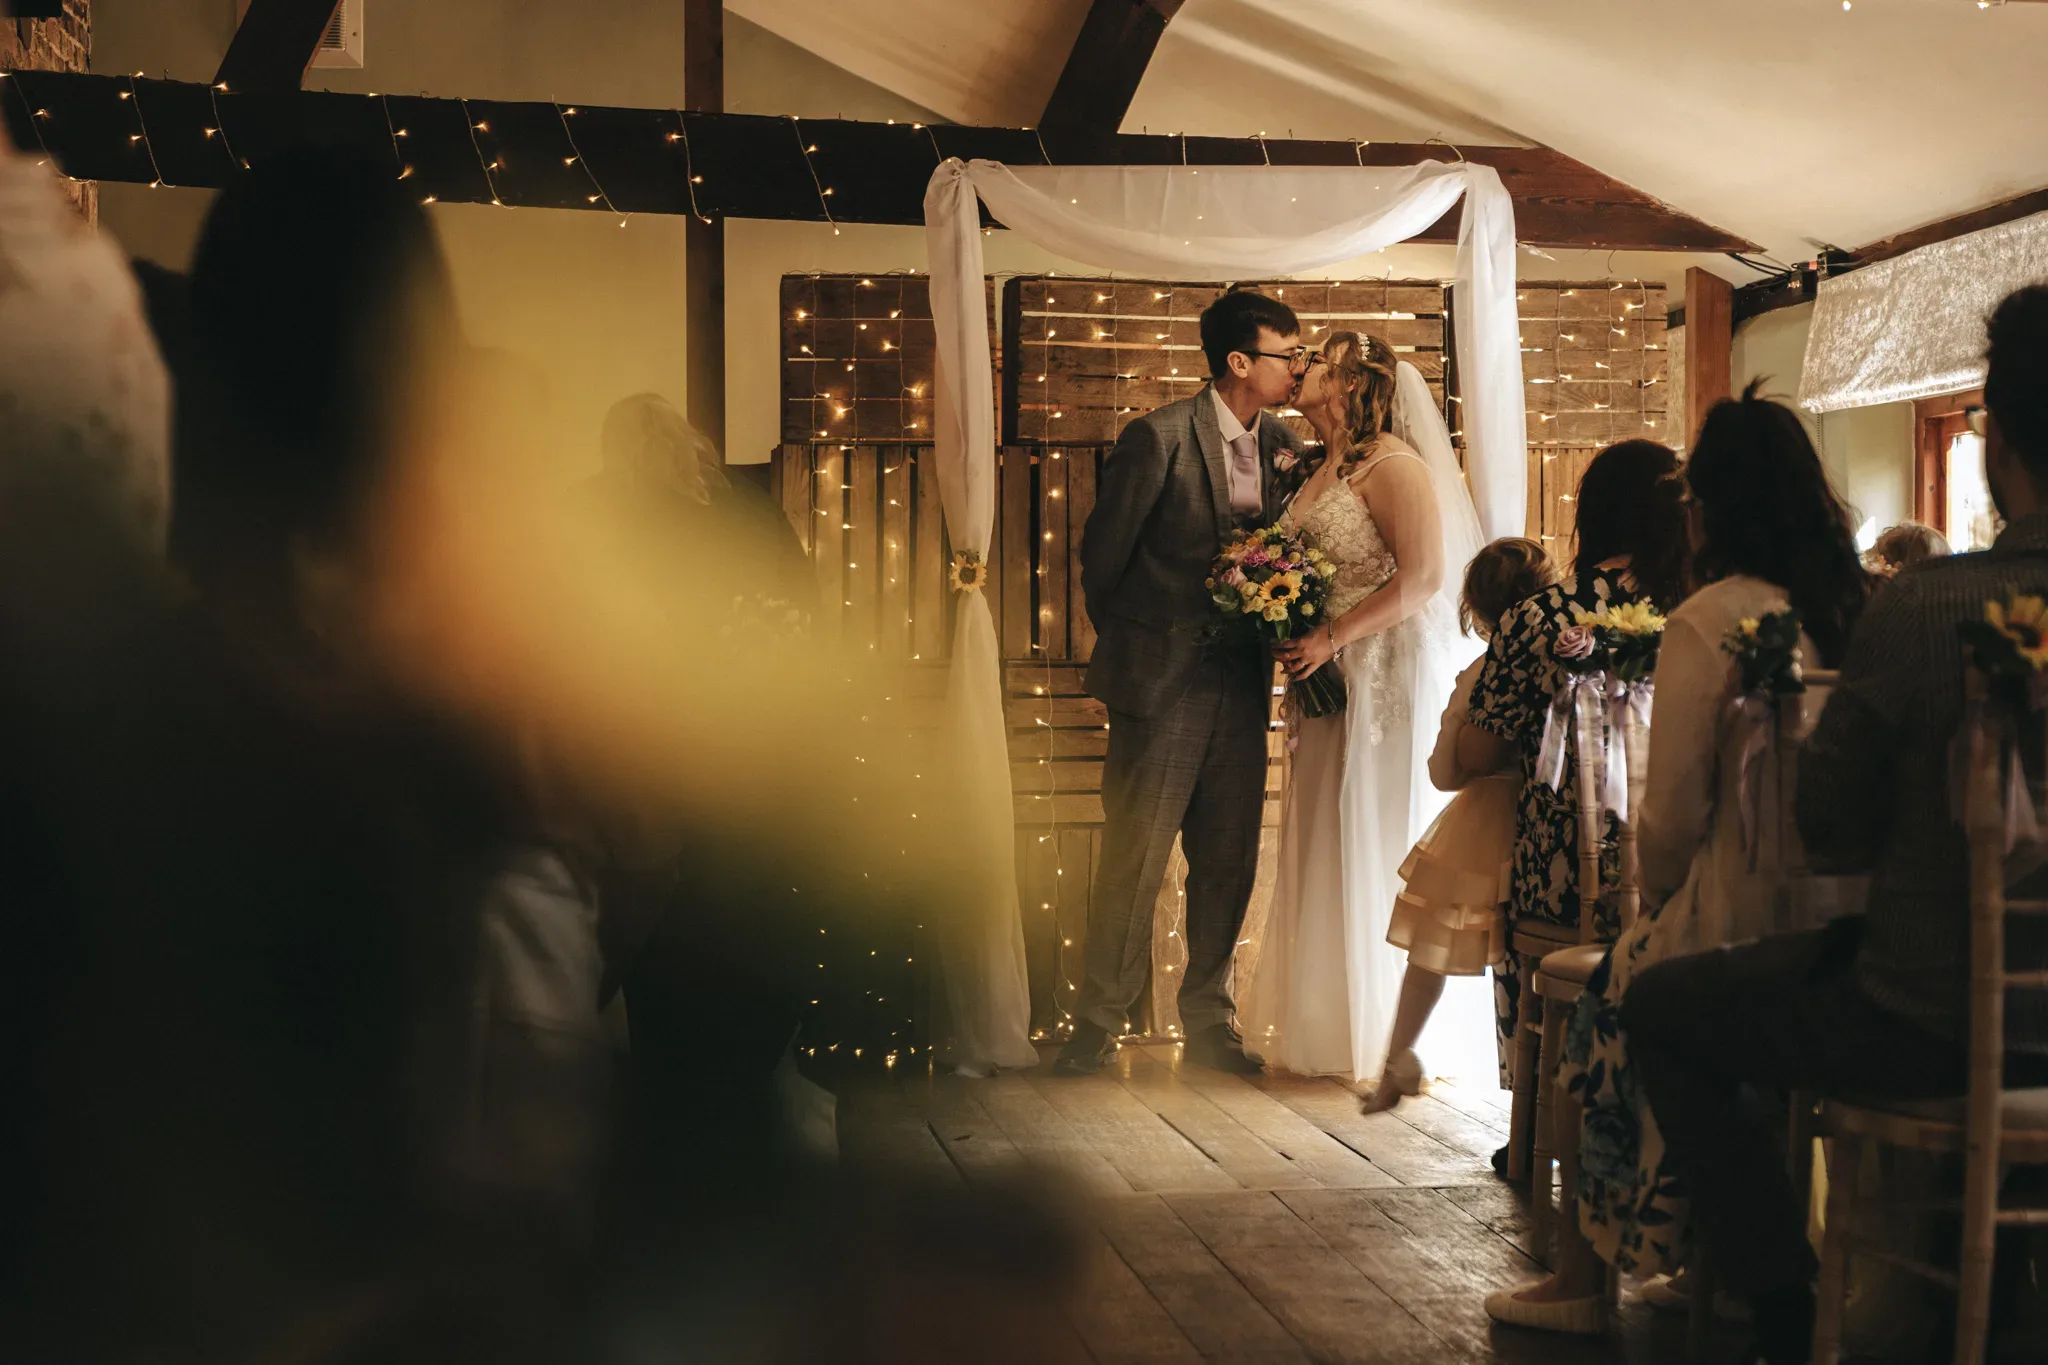 A newlywed couple shares a kiss amidst the warm ambiance of their rustic wedding venue, framed by strings of lights and the affectionate gaze of their guests.